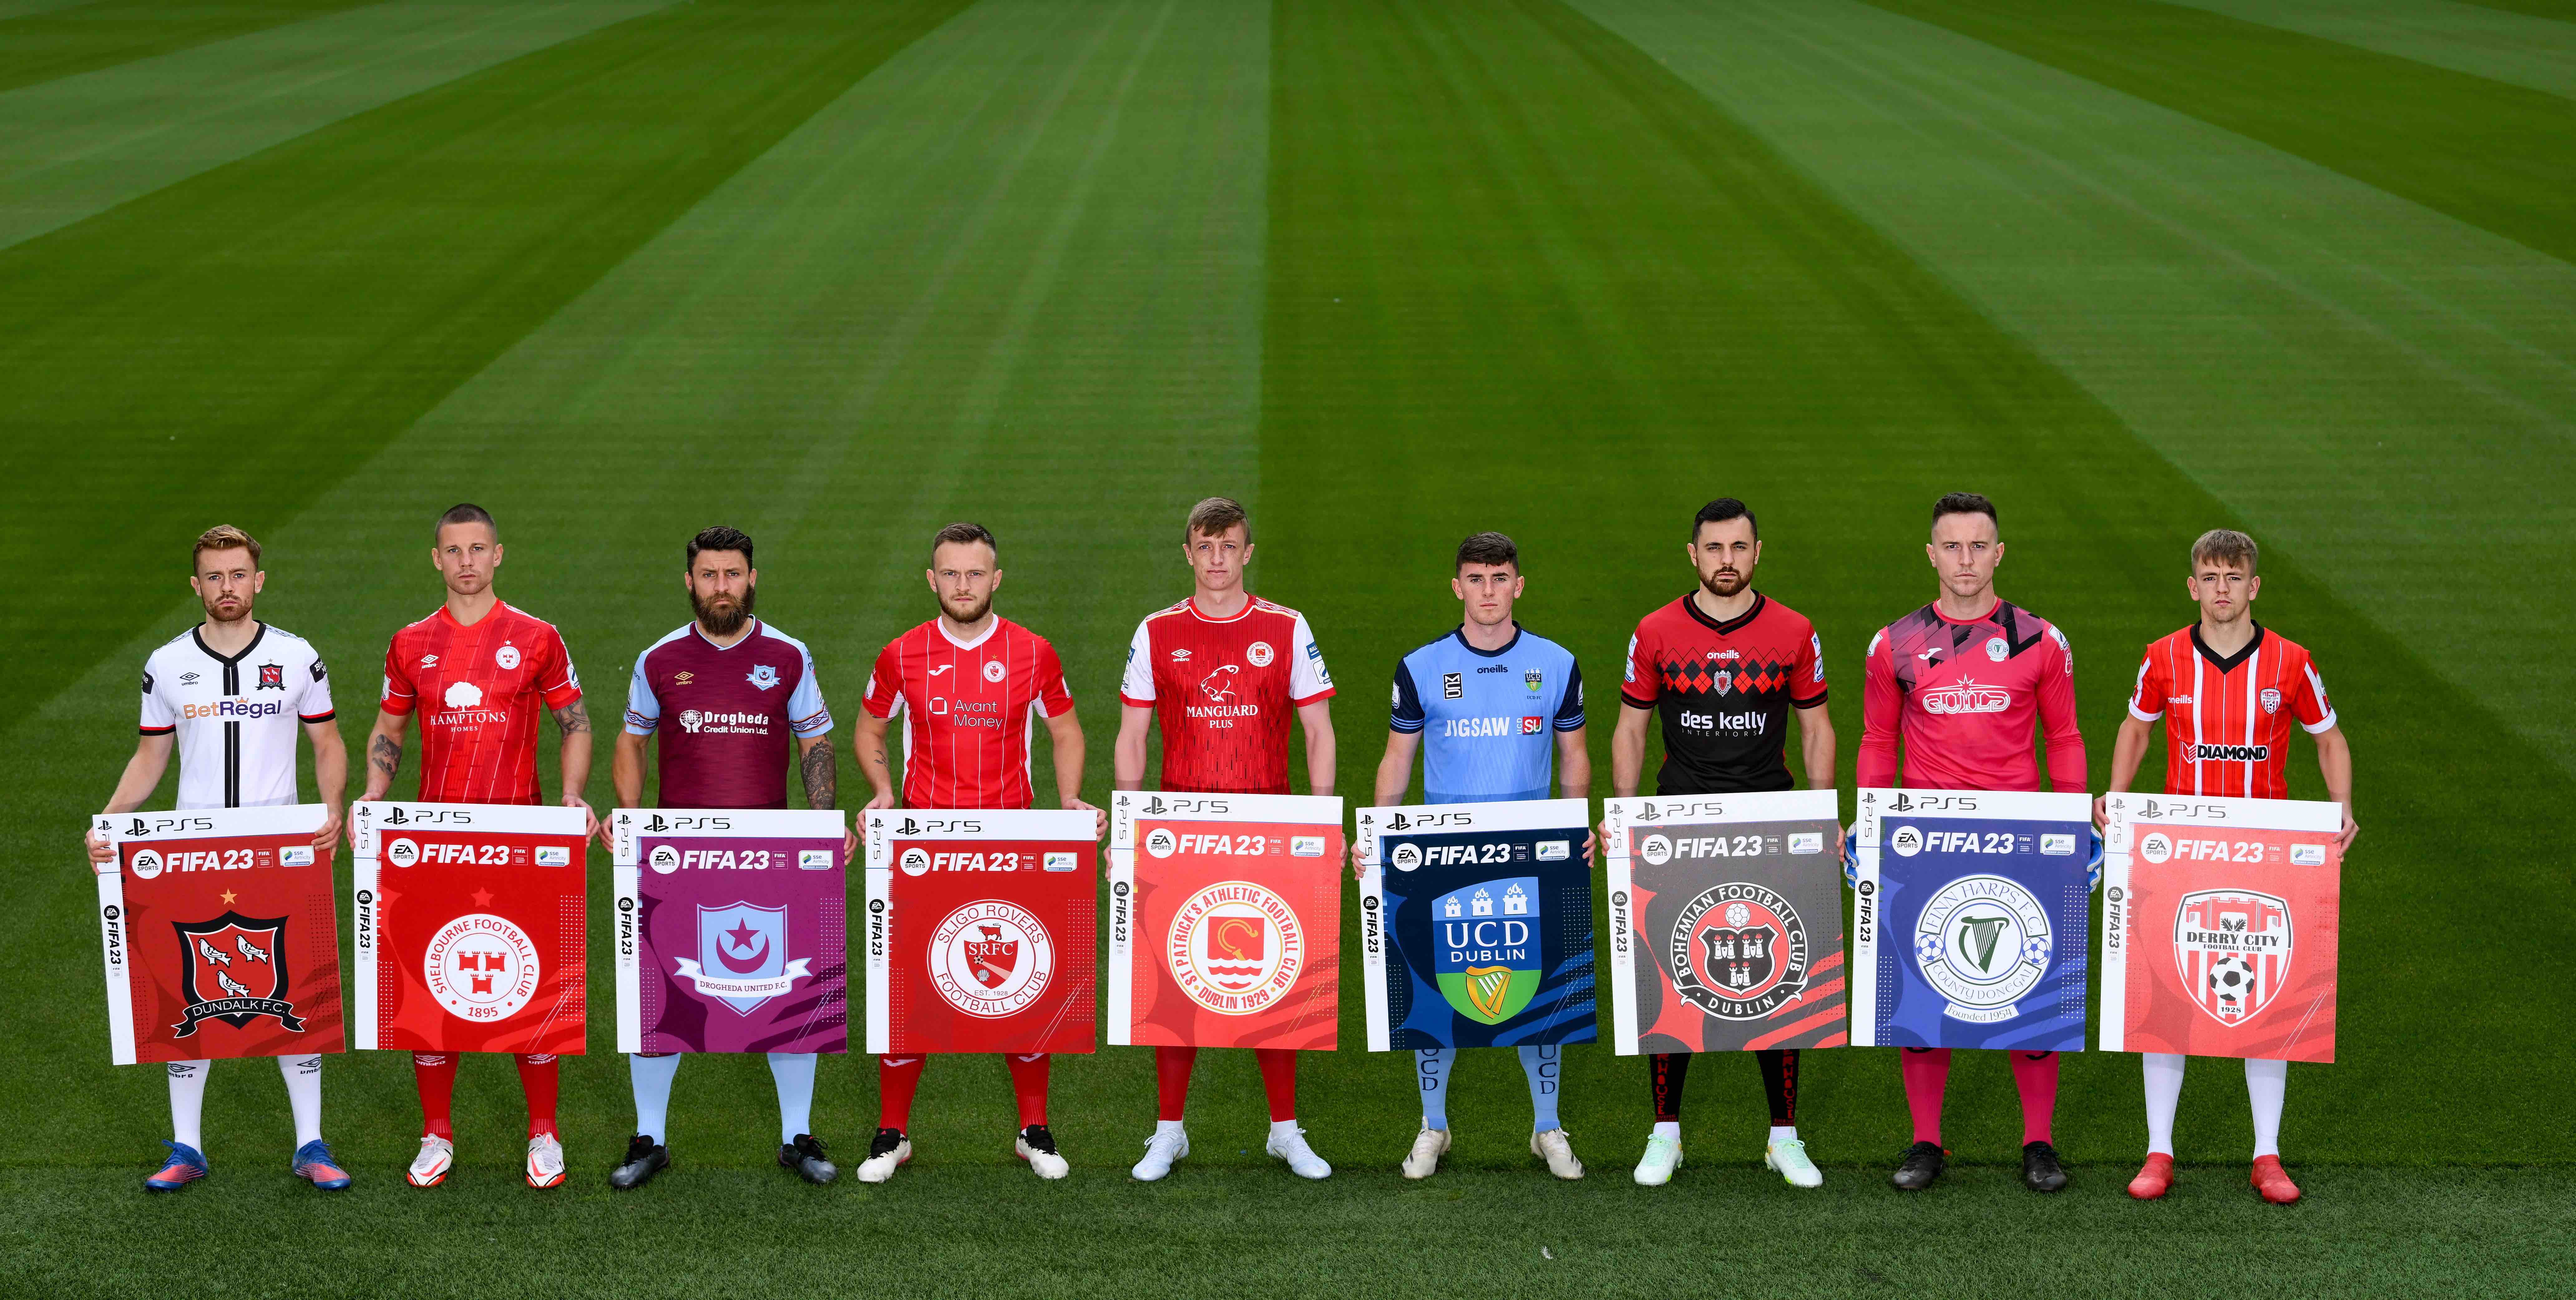 21 September 2022; Return of the packs! SSE Airtricity League FIFA 23 Club Packs are back! Featuring the individual club crest of all 10 Premier Division teams, these exclusive sleeves will be available to download free from https://www.ea.com/games/fifa/fifa-23 when the game launches Friday, 30th September! SSE Airtricity League players, from left, Paul Doyle of Dundalk, Luke Byrne of Shelbourne, Gary Deegan of Drogheda United, David Cawley of Sligo Rovers, Chris Forrester of St Patrick's Athletic, Michael Gallagher of UCD, Jordan Flores of Bohemians, Gavin Mulreany of Finn Harps and Ciaron Harkin of Derry City during the FIFA 23 SSE Airtricity League cover launch at Aviva Stadium in Dublin. Photo by Stephen McCarthy/Sportsfile *** NO REPRODUCTION FEE ***